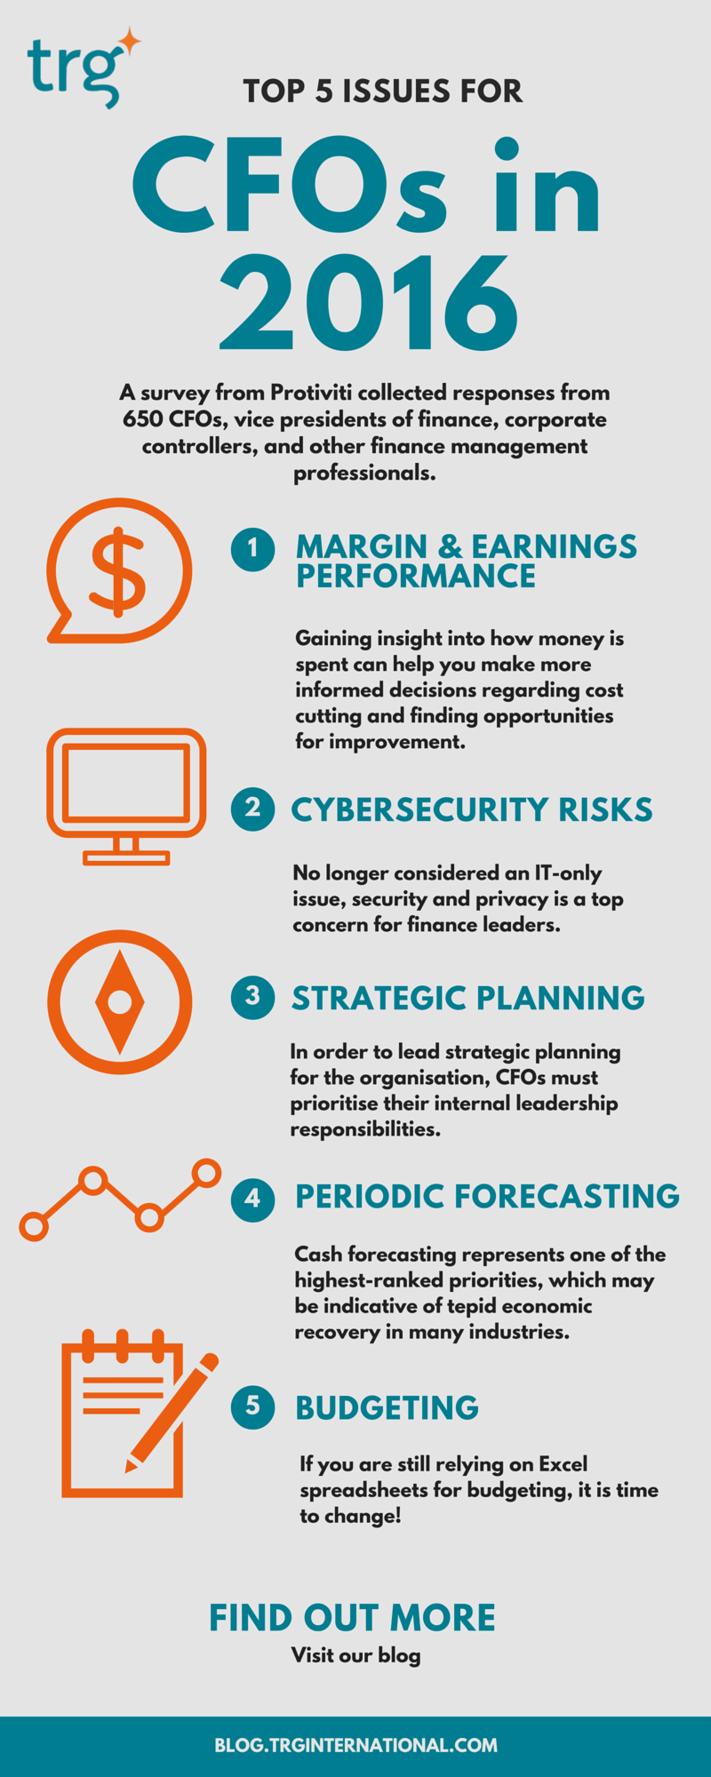 Top_5_issues_for_CFOs_in_2016_v6.png